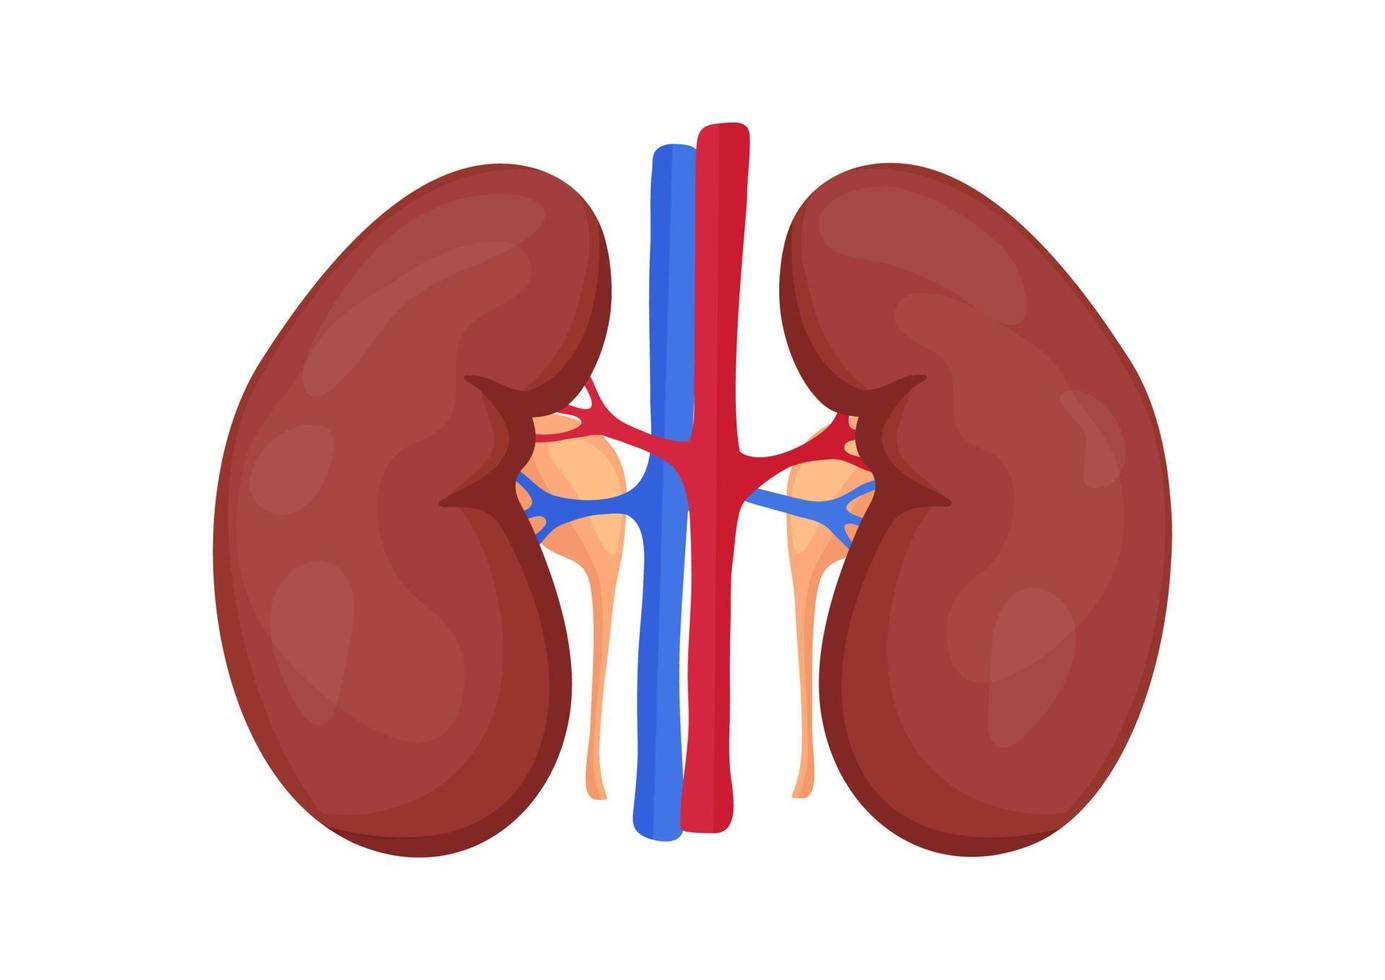 Human kidney and its arteries isolated on white background. Vector illustration of human kidney organ